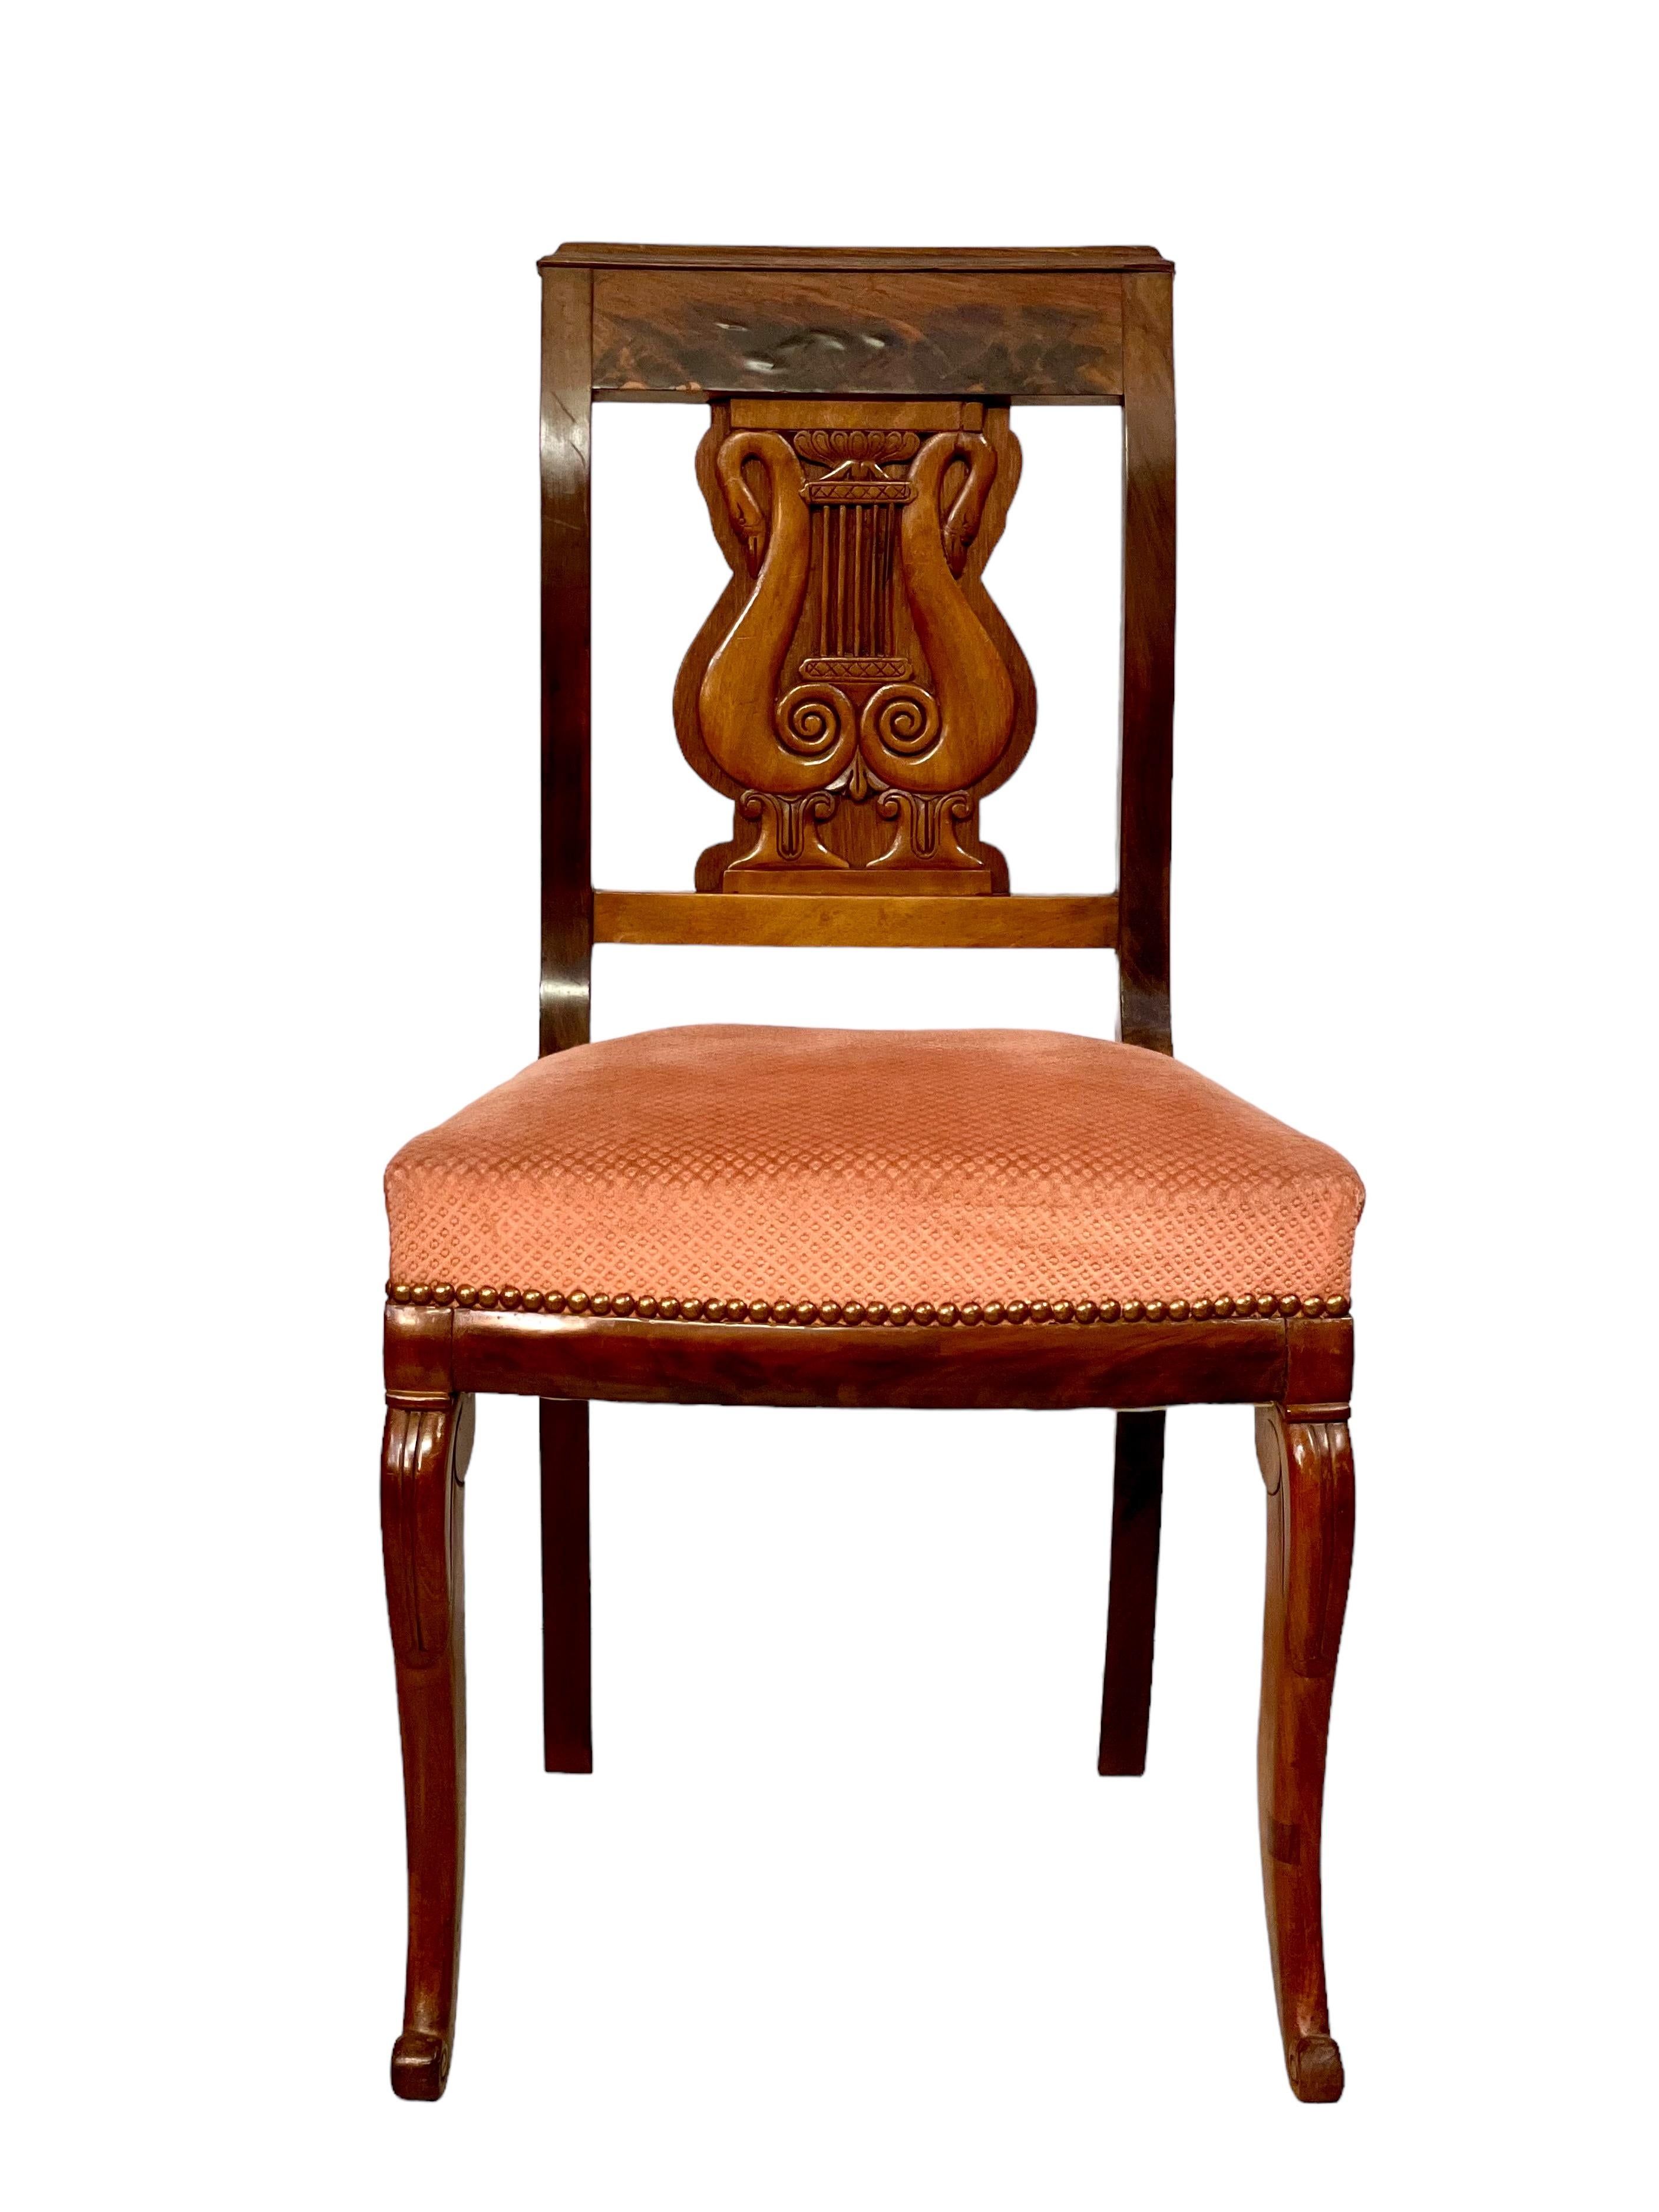 A set of six antique French dining chairs, dating from the Restoration period (early 19th century), each featuring an elaborately carved back in the form of a lyre. Crafted from fruitwood and fruitwood veneer, these chairs are each fitted with a